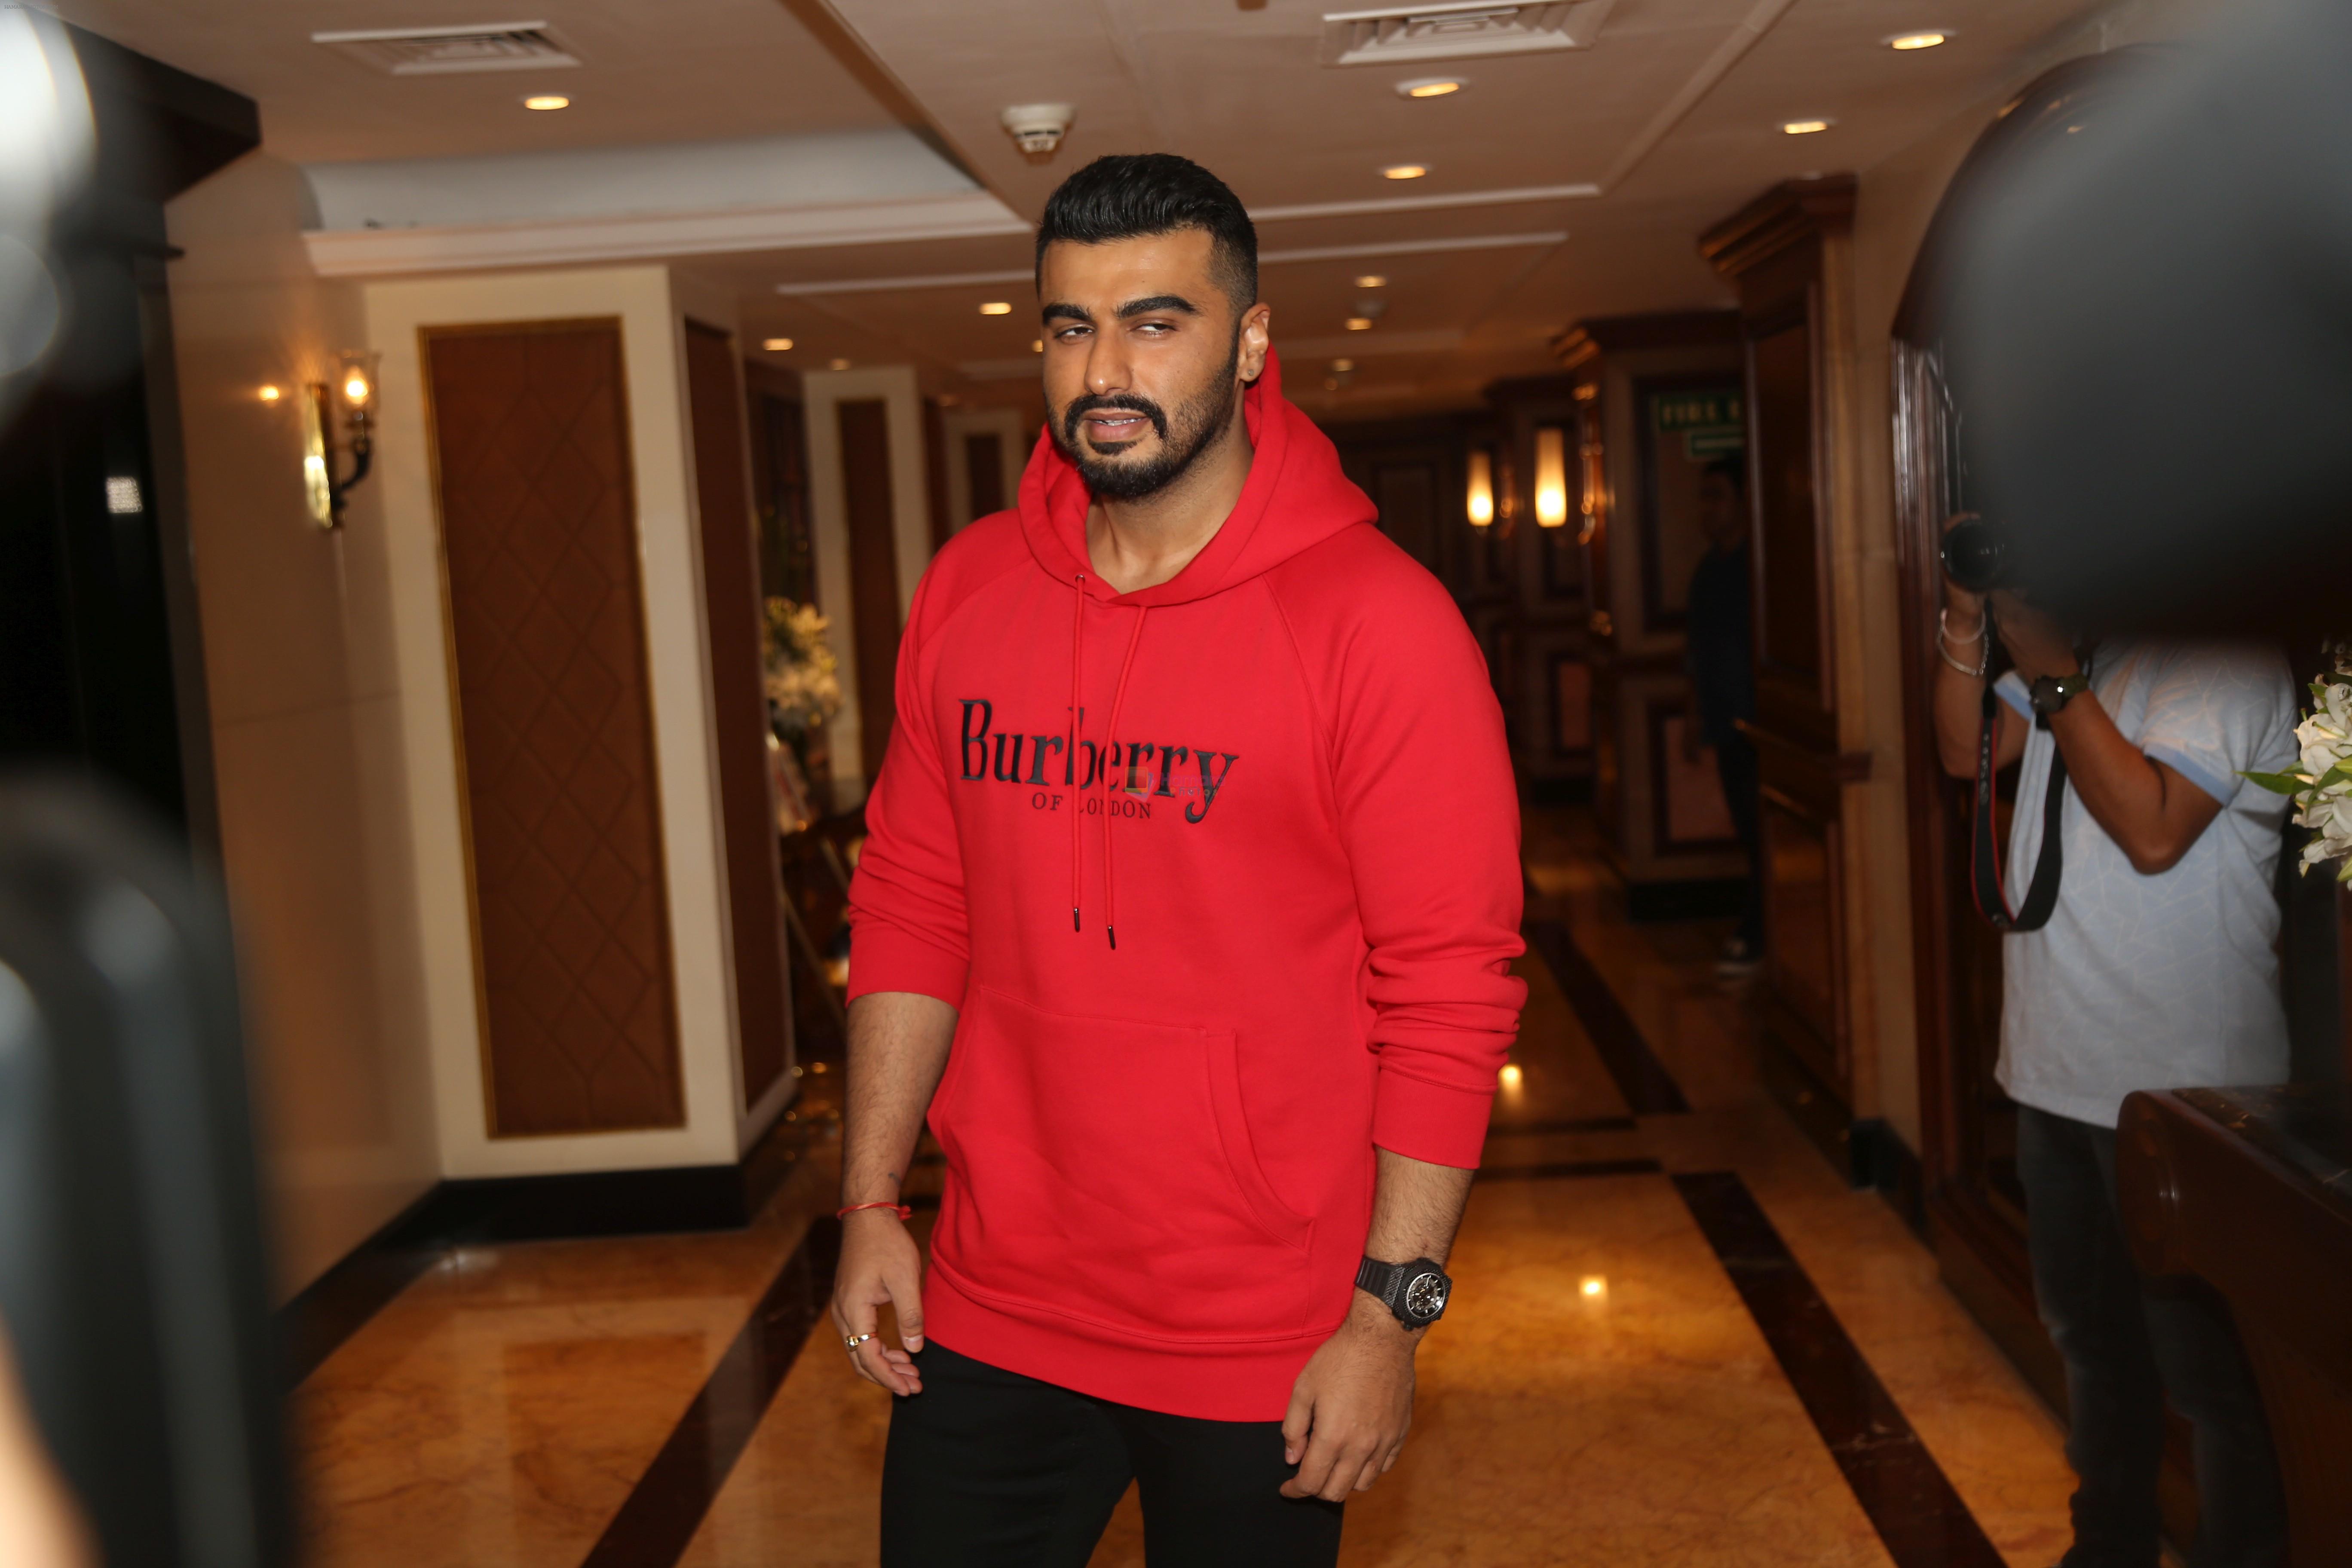 Arjun Kapoor celebrates rose day with cancer patients at Taj Lands End bandra on 24th Sept 2019